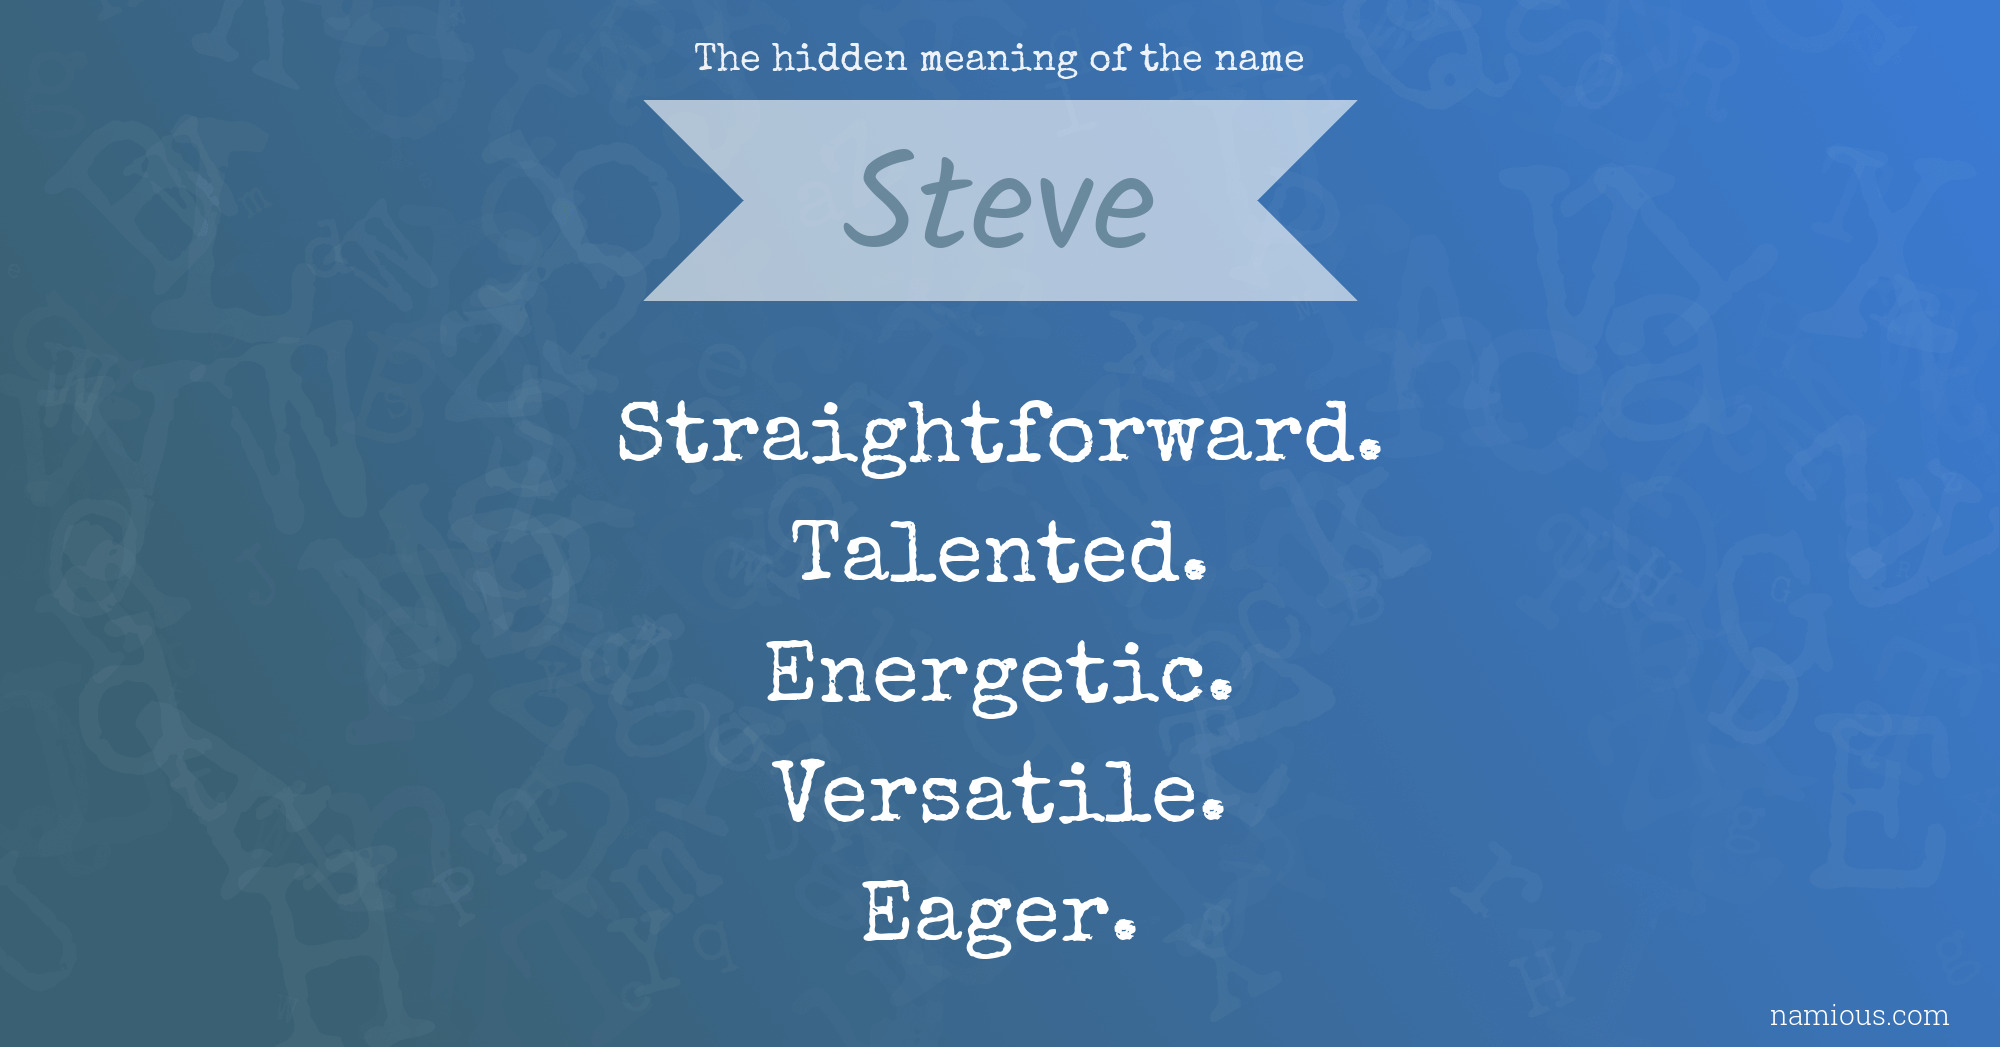 The hidden meaning of the name Steve